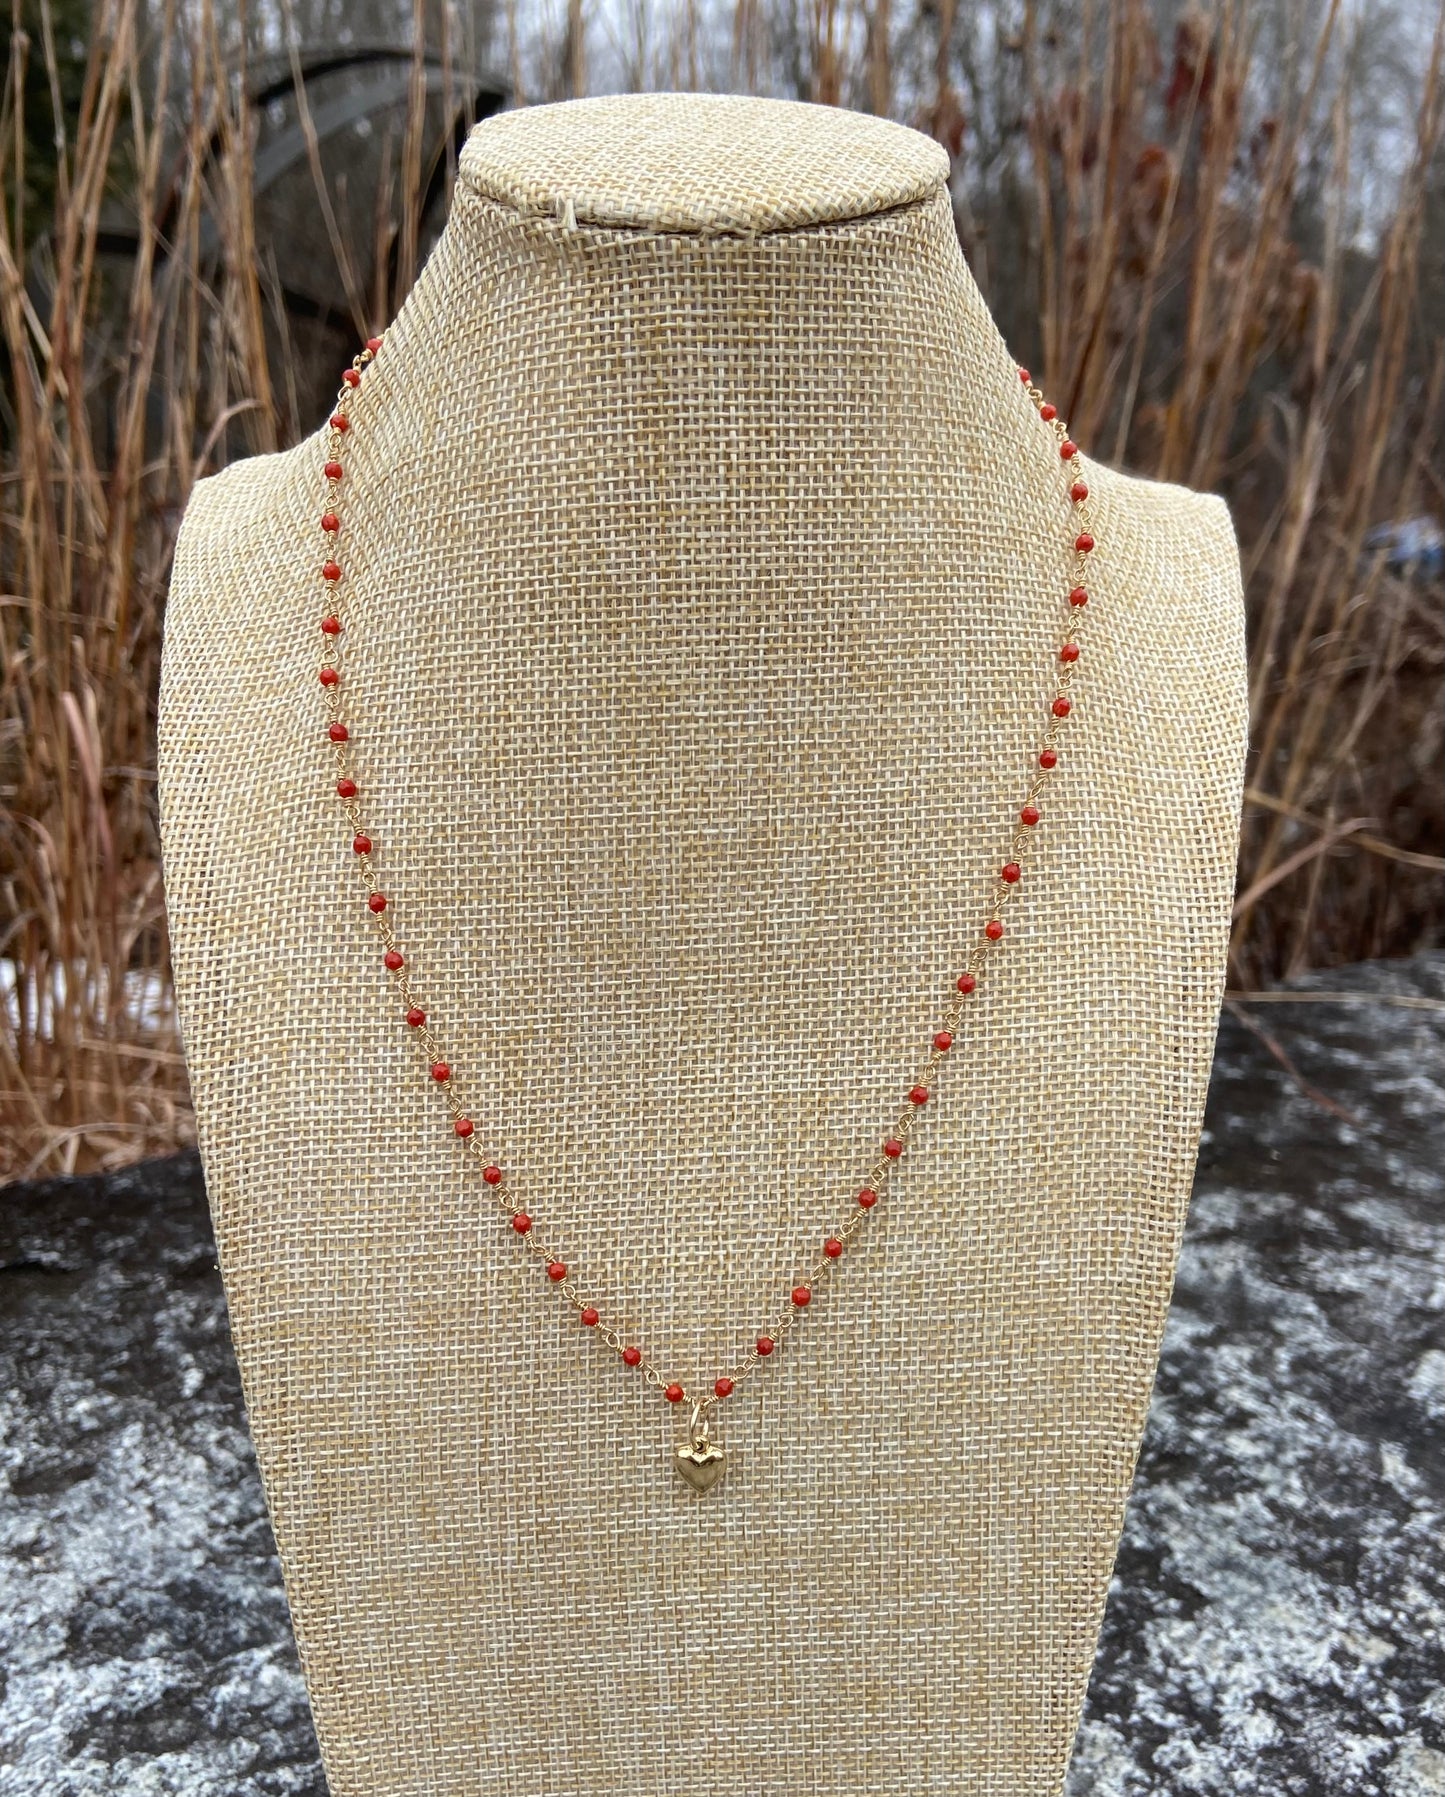 Adelaide Harris red coral beaded necklace with small heart charm